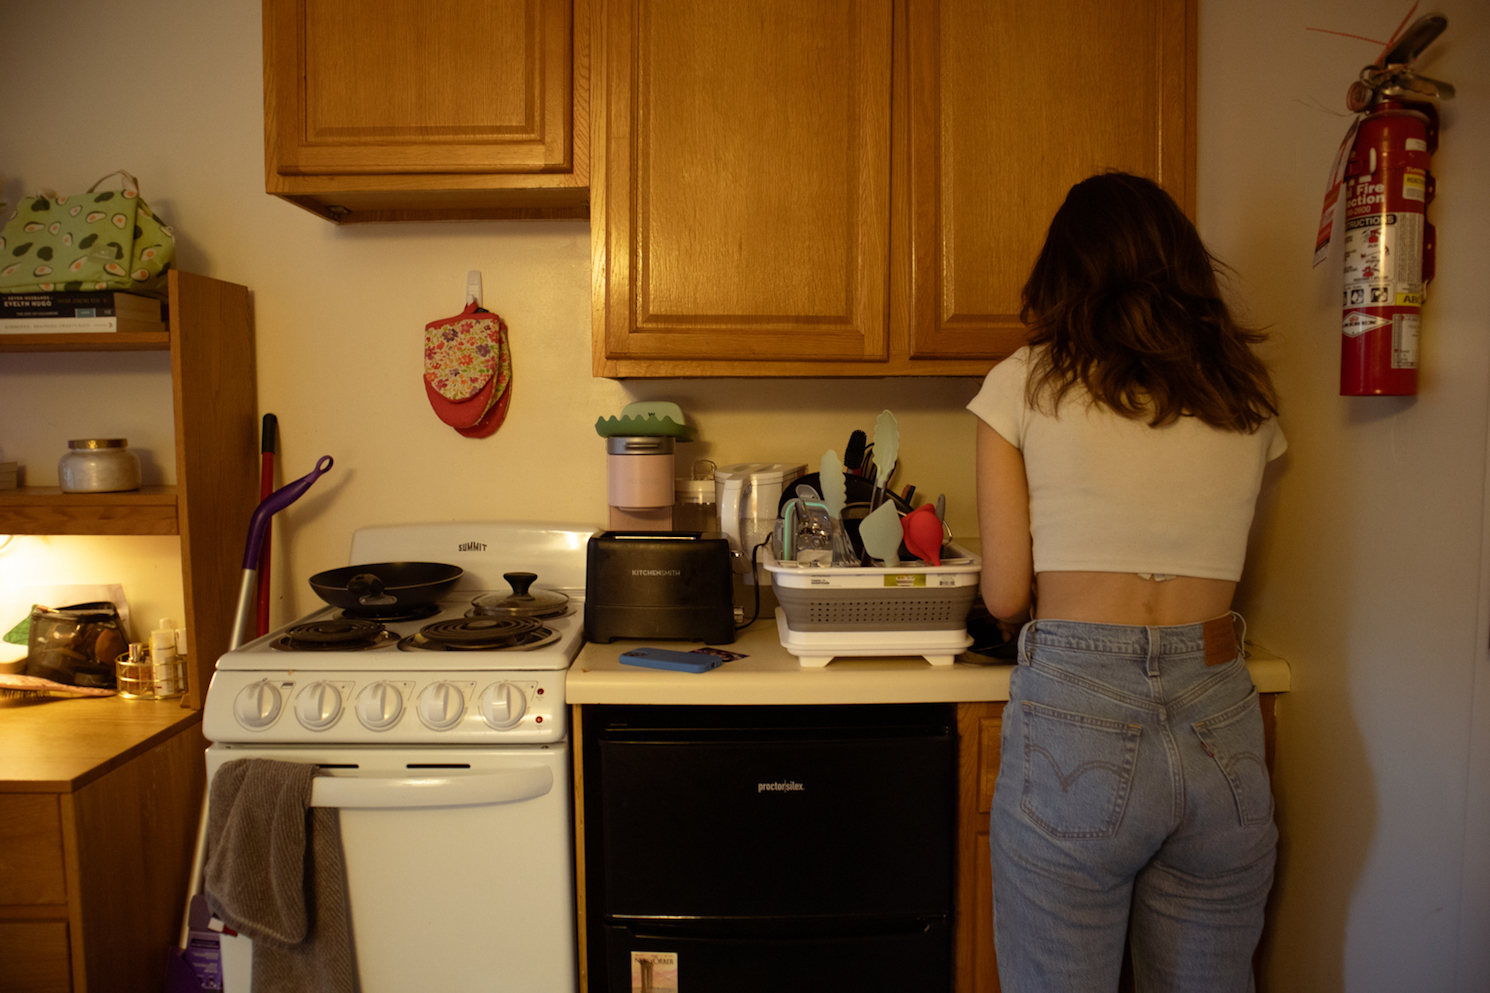 The back of a girl wearing blue jeans and a white t-shirt. She stands in a kitchen with a white oven and three wooden cabinets.